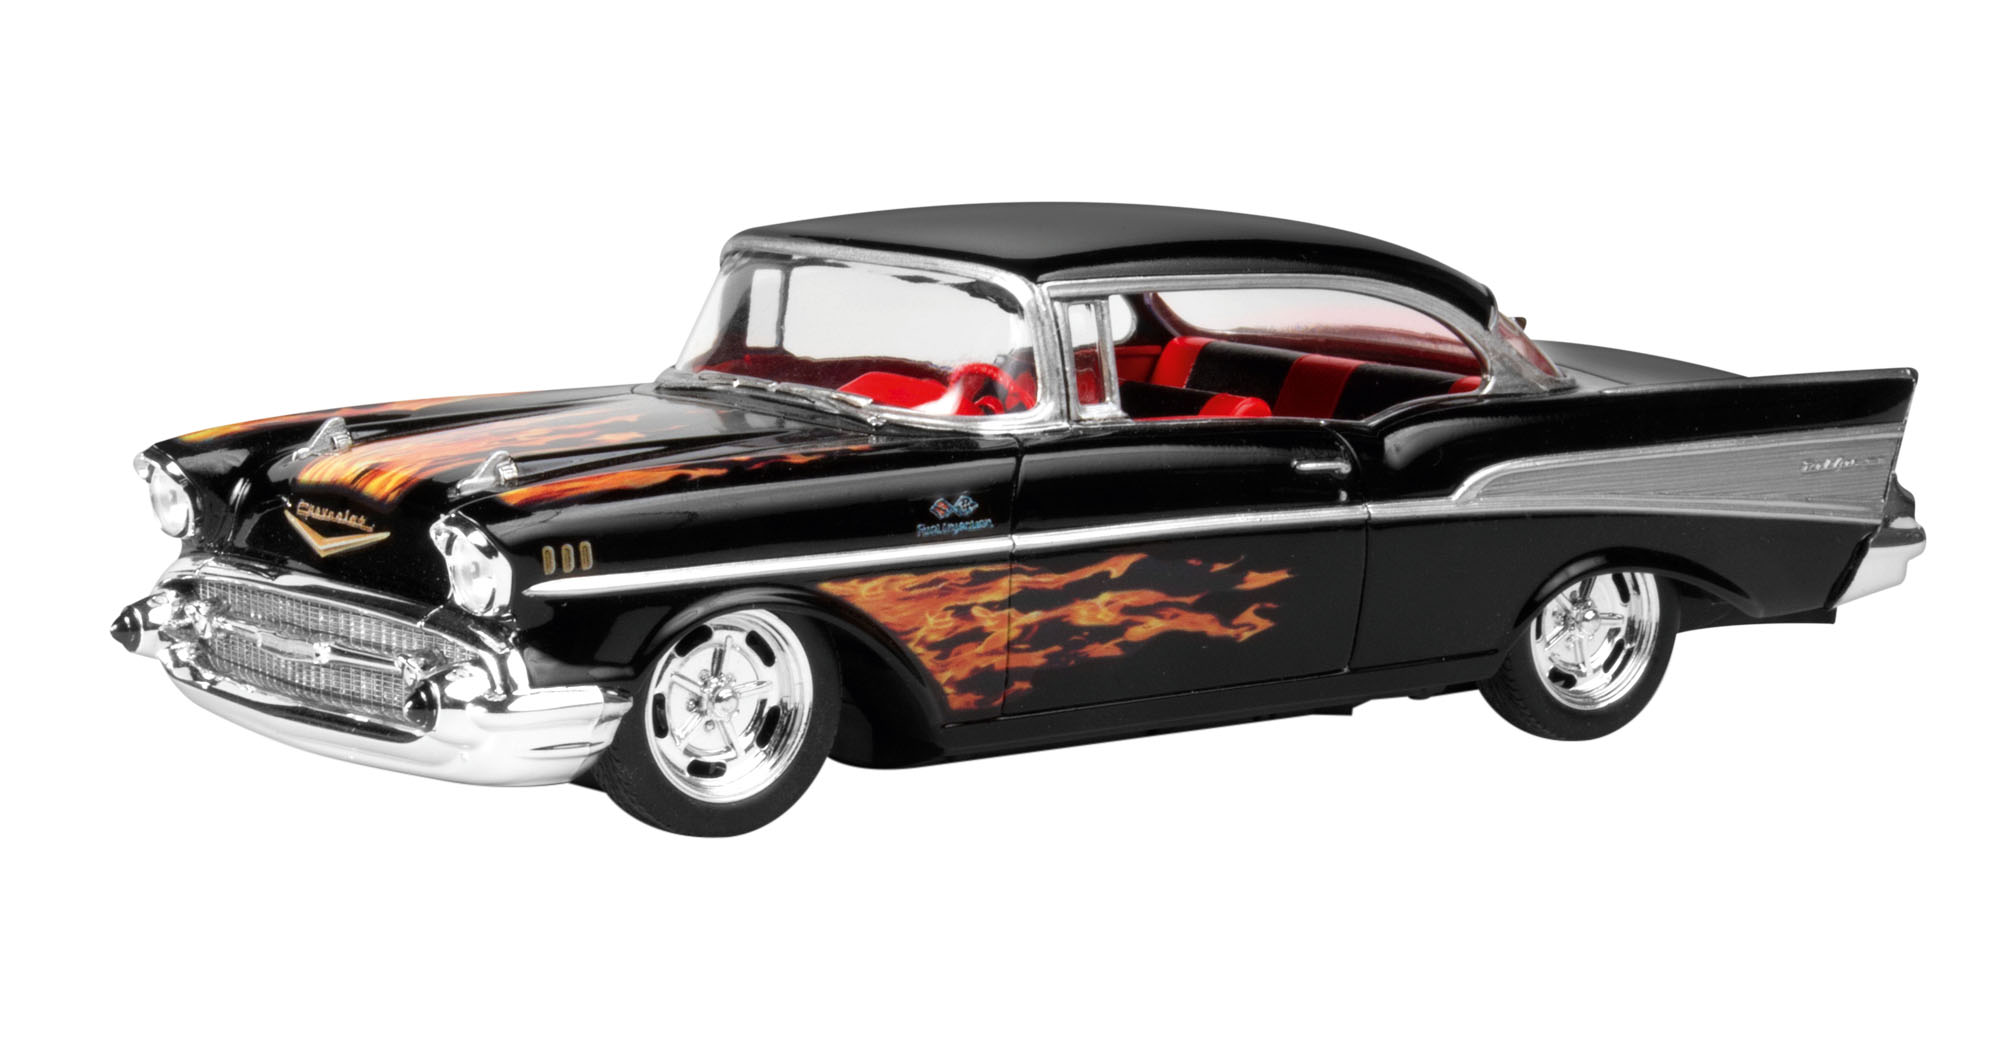 Revell 1957 Chevy Bel Air in 1:25 bouwpakket snap tite